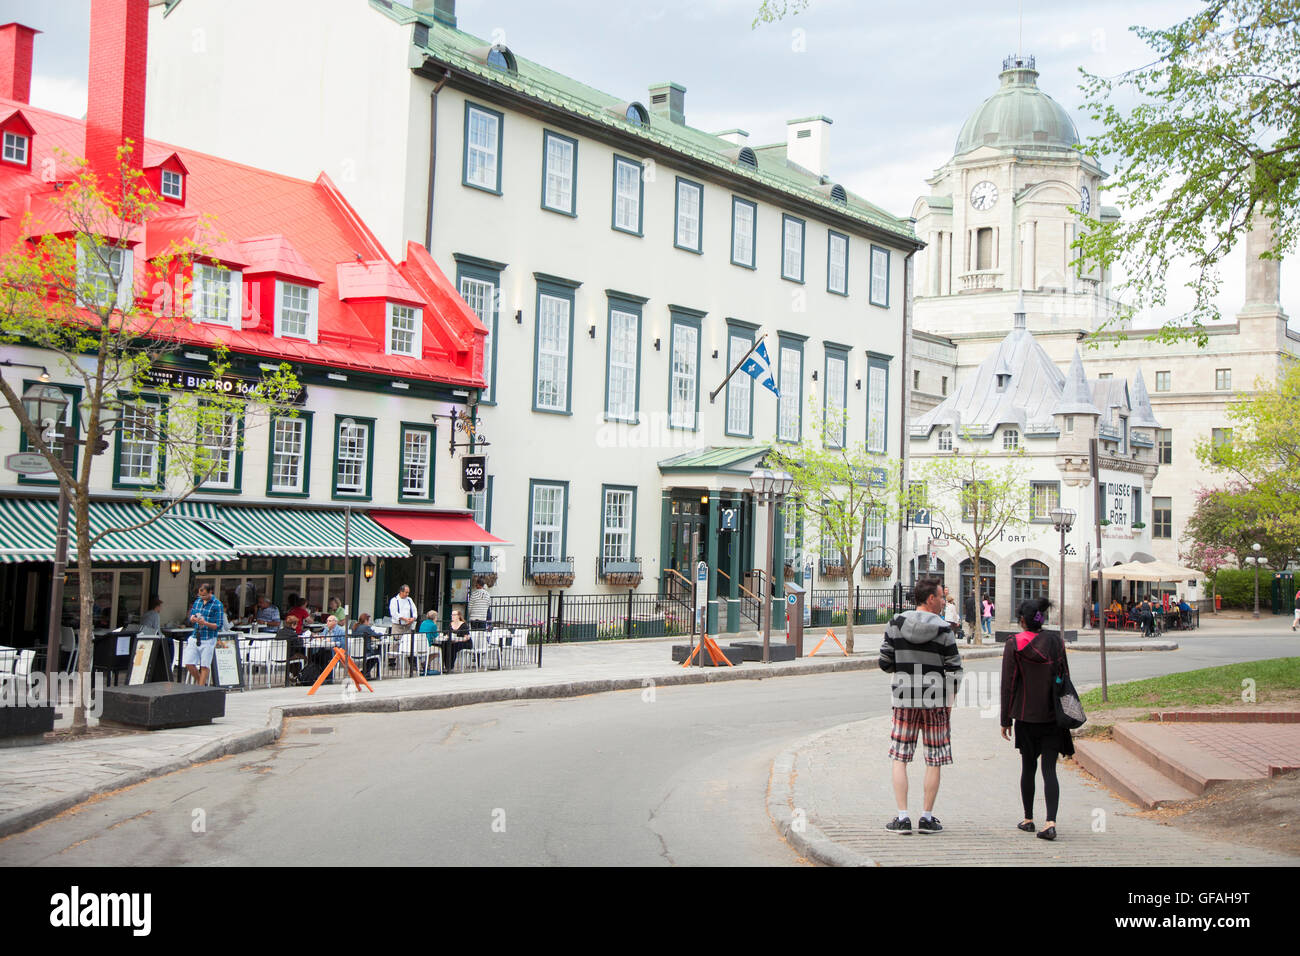 QUEBEC CITY - MAY 25, 2016: Auberge du Tresor hotel and Bistro 1640 located on historic Rue St. Anne in old Quebec City. Stock Photo